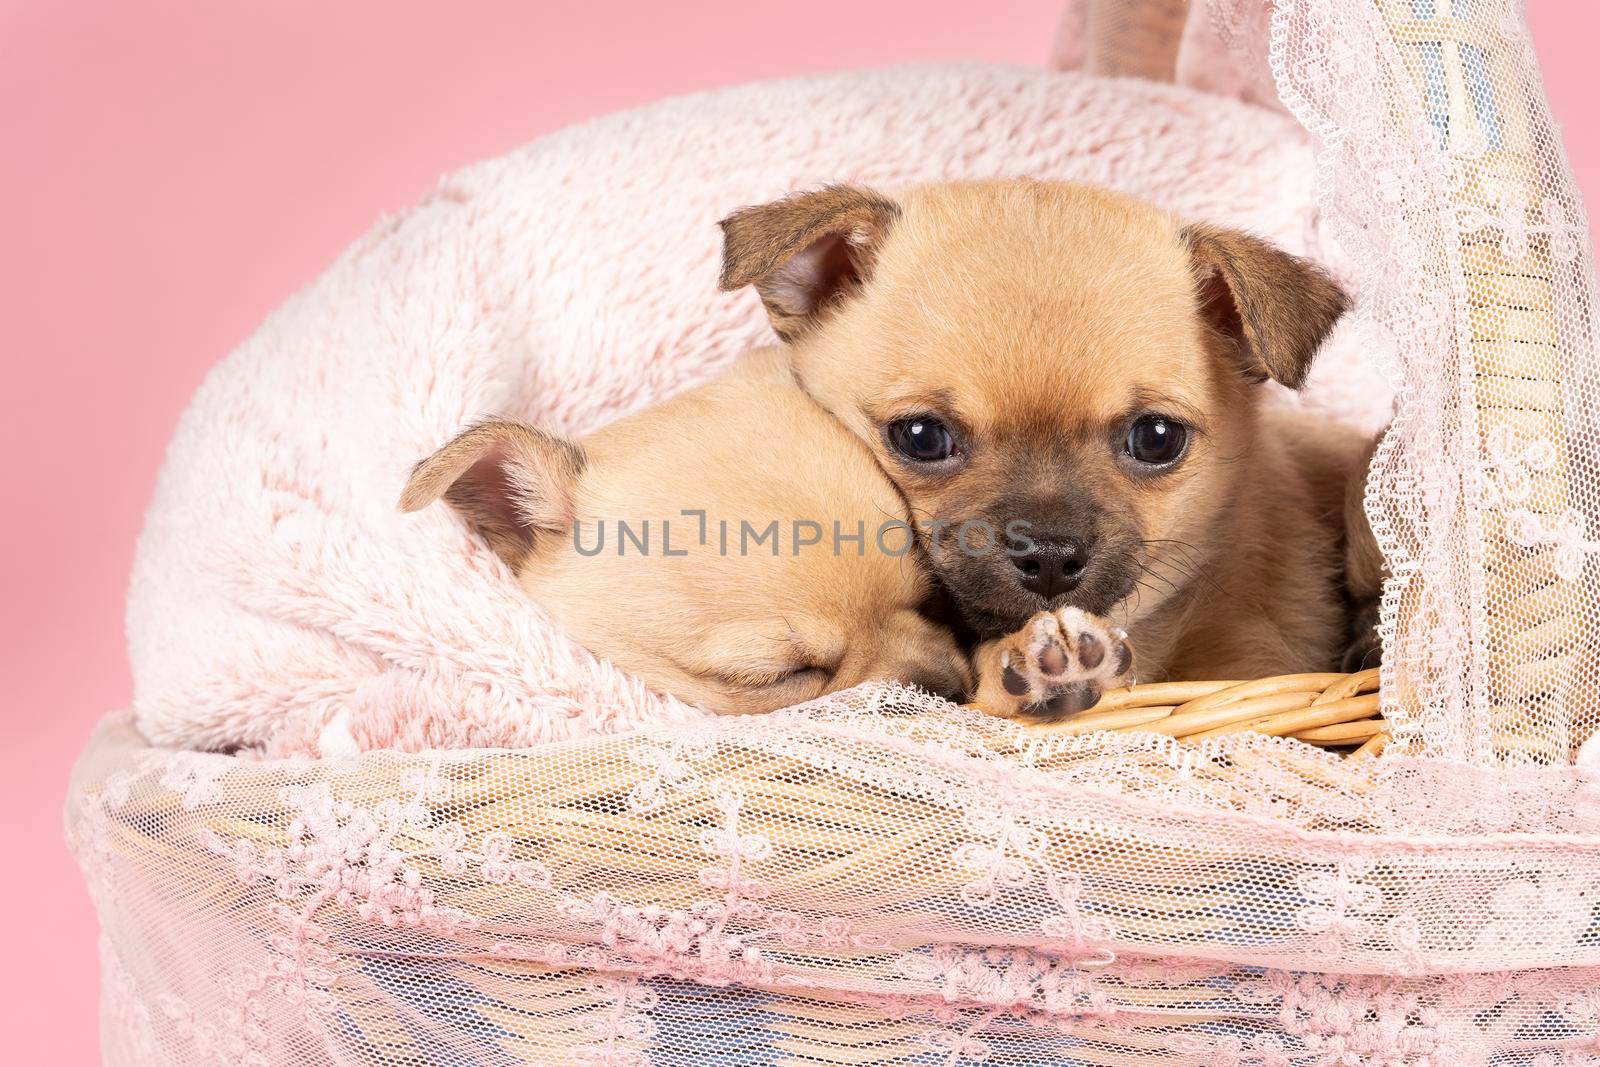 Two cute little Chihuahua puppies sleeping on a pink fur in a pink lace basket with a pink background by LeoniekvanderVliet